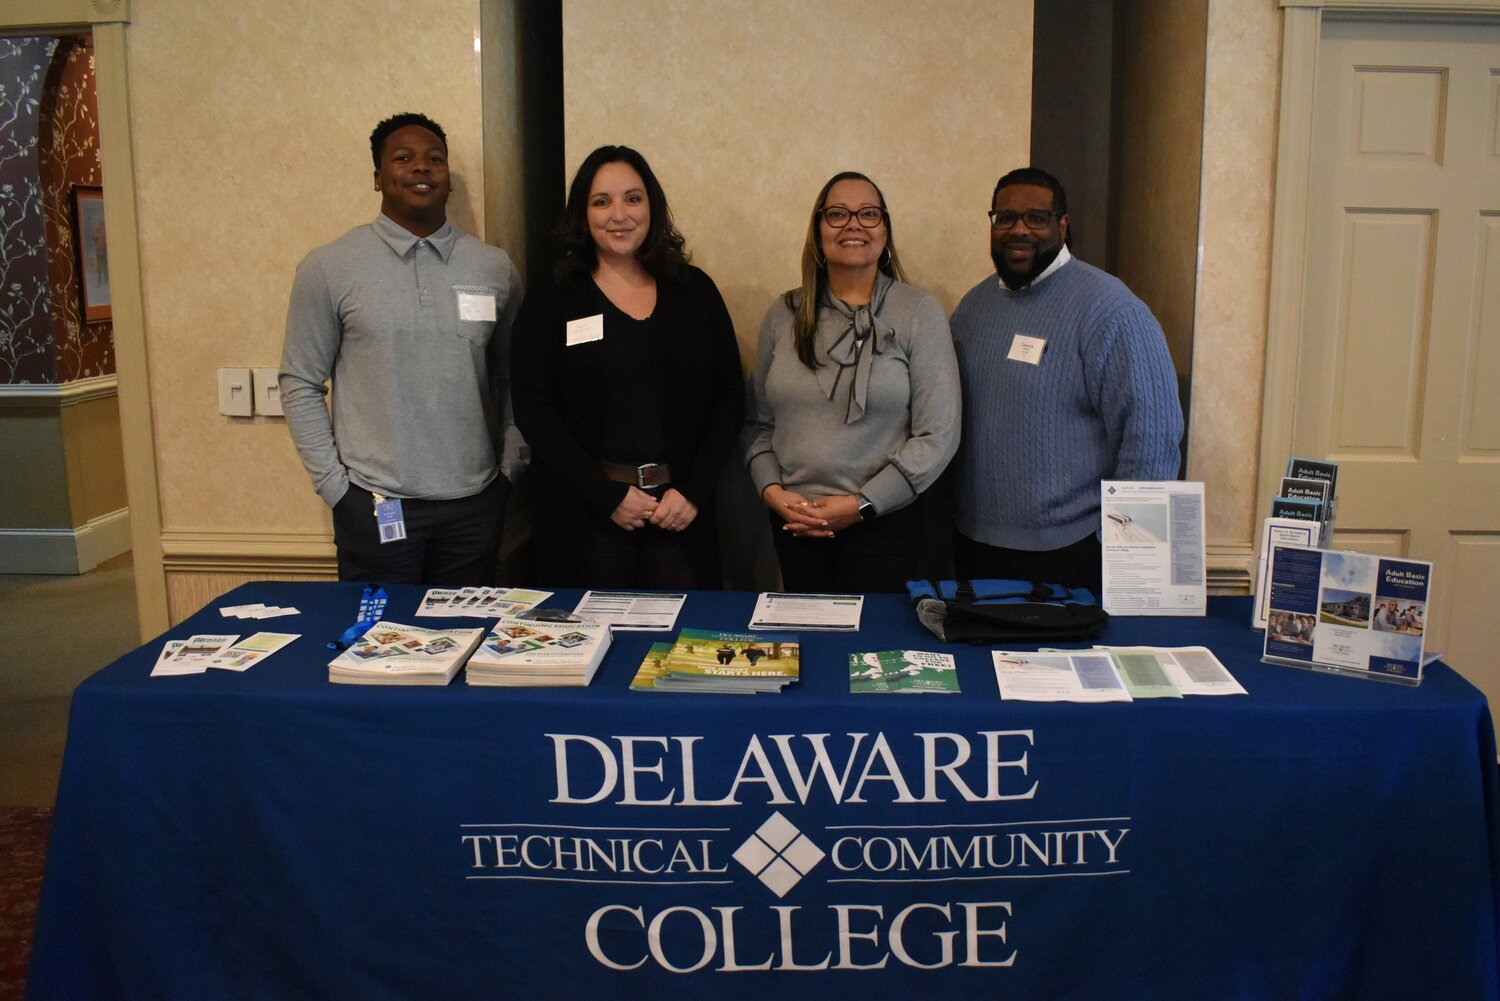 The Delaware Technical Community College (DTCC) team at Excellence in Education 2023.